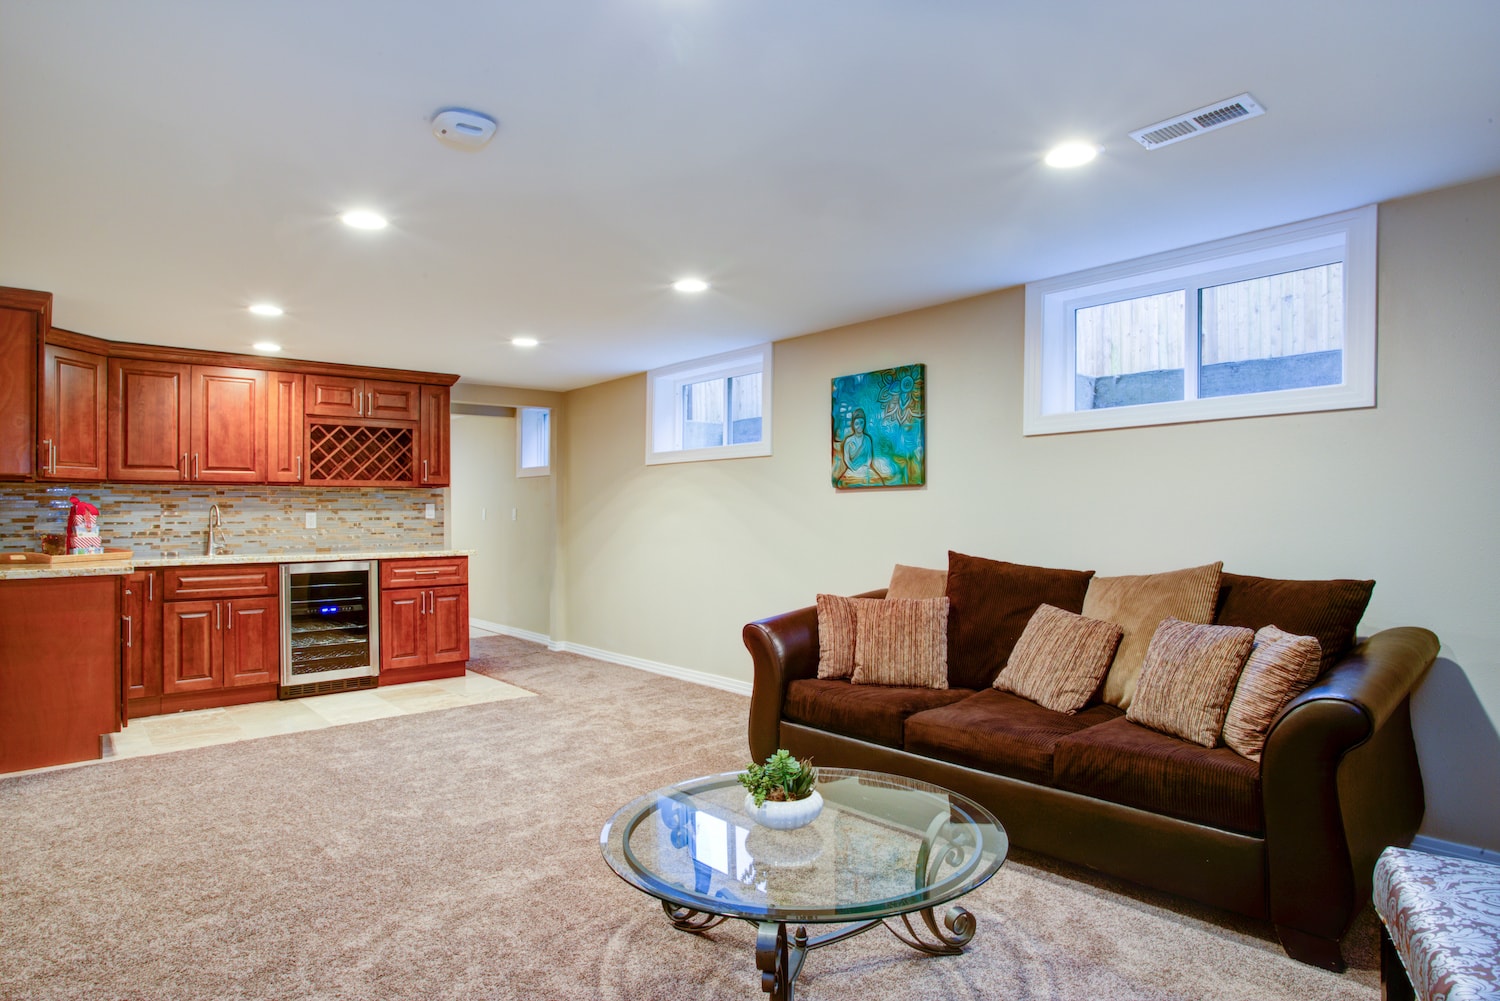 basement remodel before and after featured